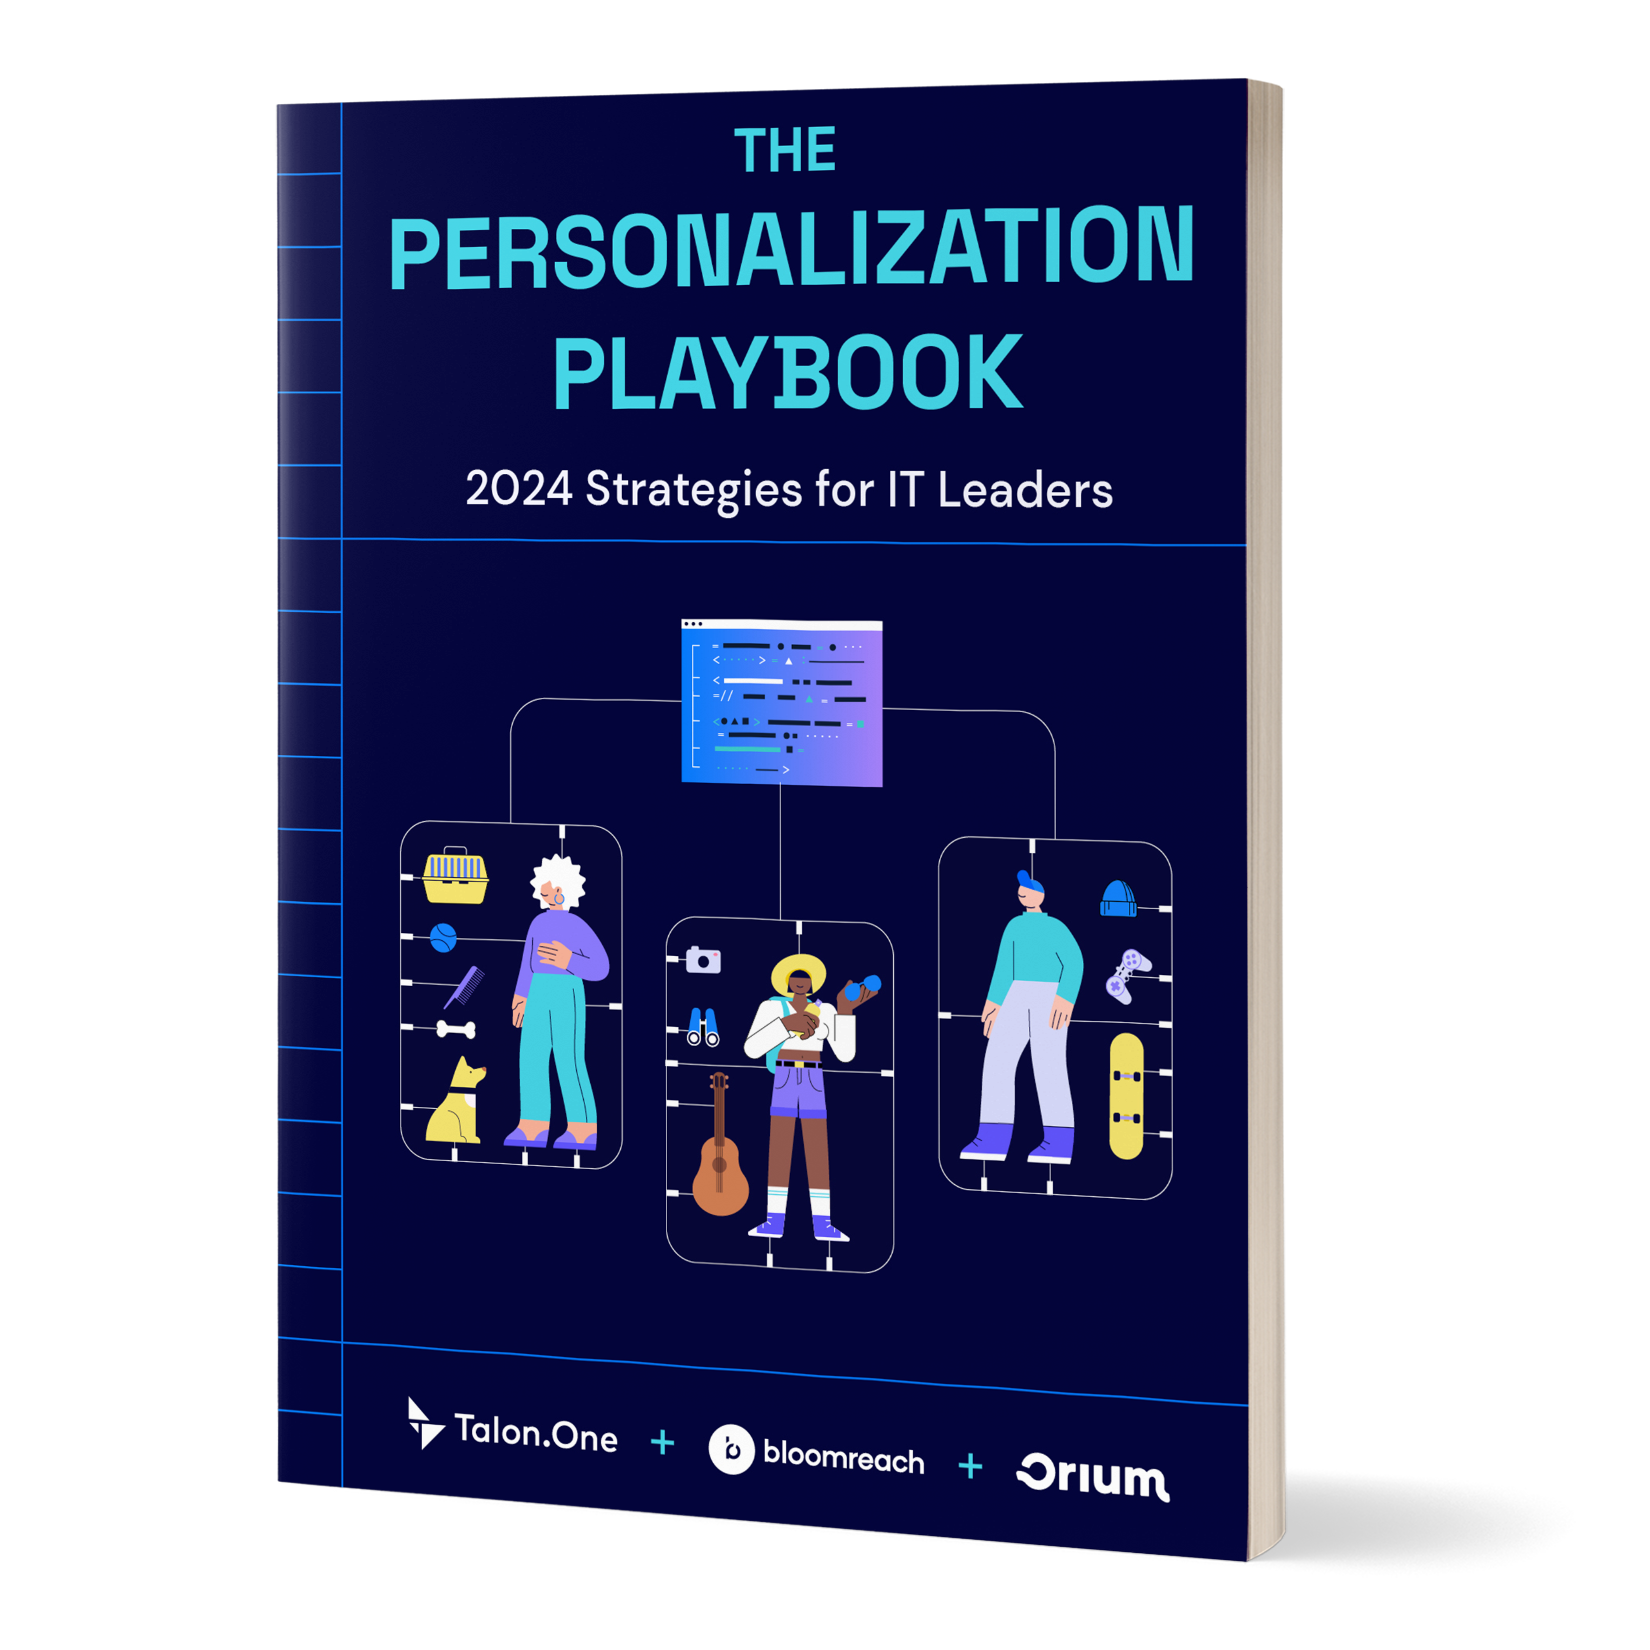 The Personalization Playbook